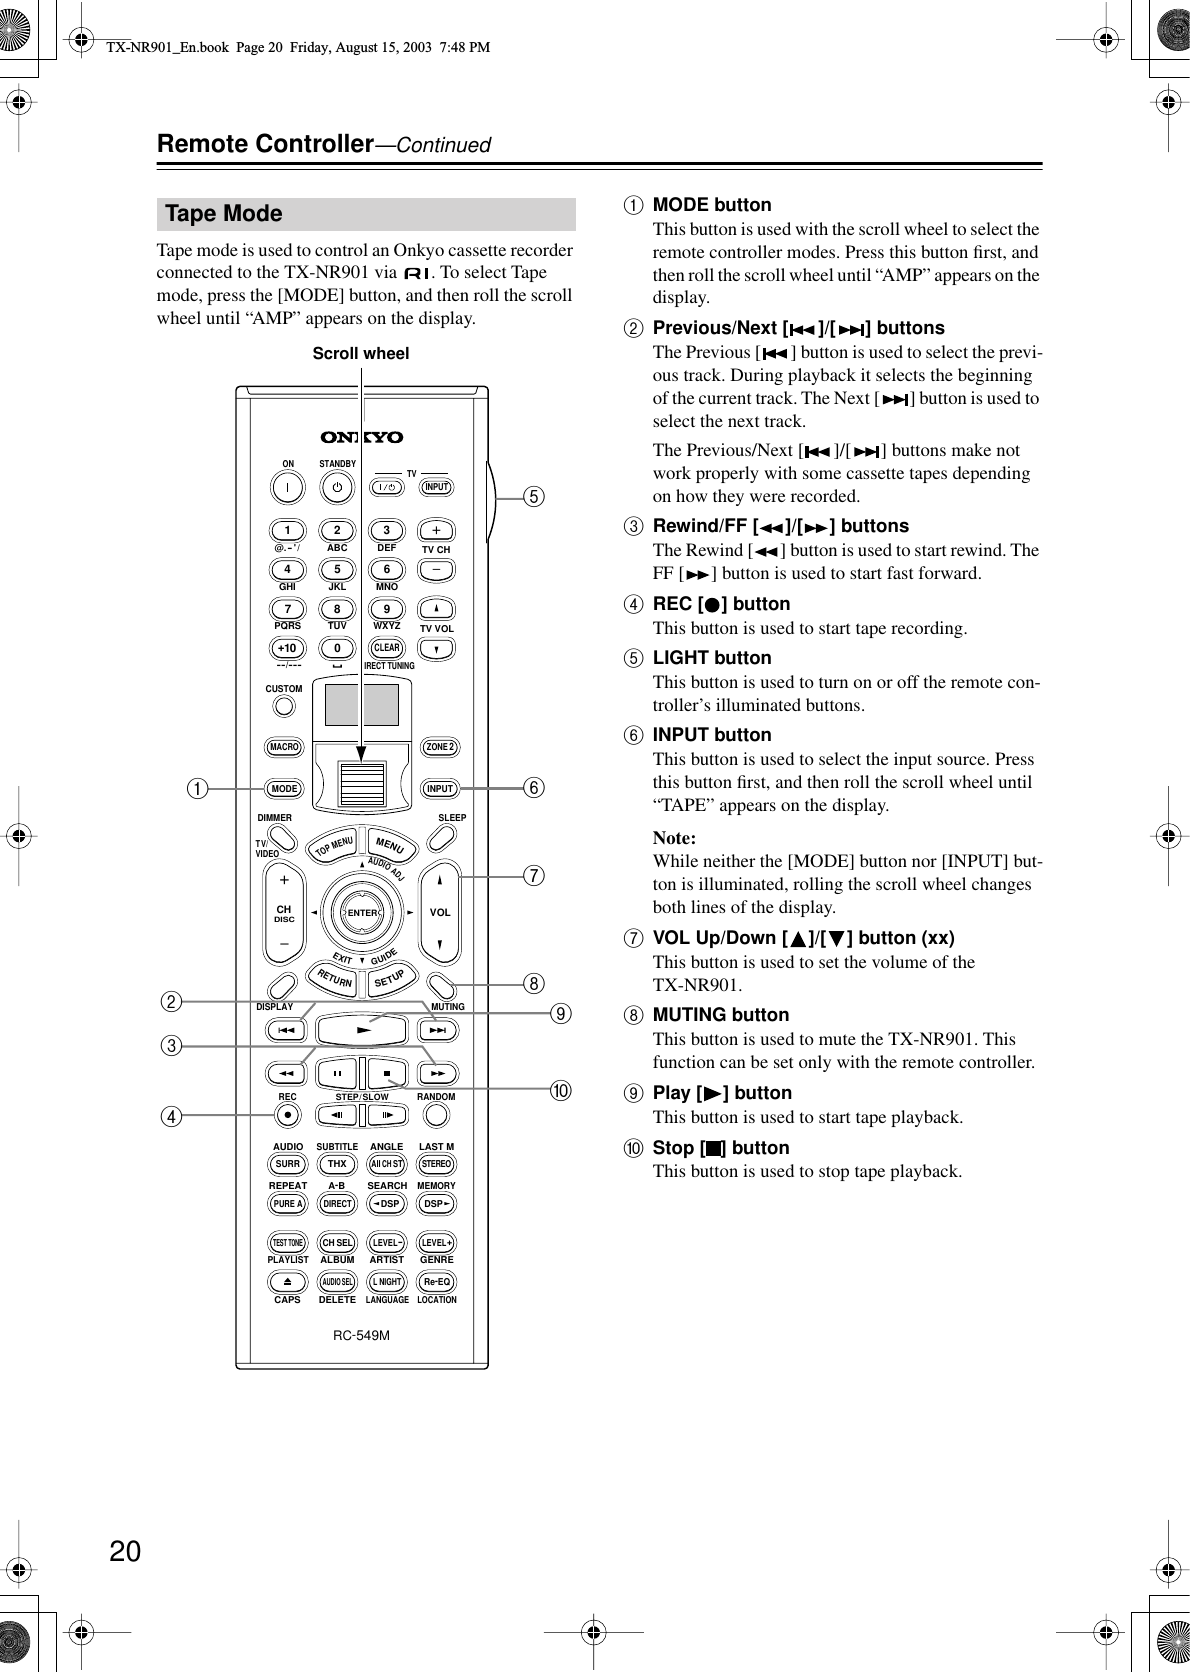 20Remote Controller—ContinuedTape mode is used to control an Onkyo cassette recorder connected to the TX-NR901 via  . To select Tape mode, press the [MODE] button, and then roll the scroll wheel until “AMP” appears on the display.AMODE buttonThis button is used with the scroll wheel to select the remote controller modes. Press this button ﬁrst, and then roll the scroll wheel until “AMP” appears on the display.BPrevious/Next [ ]/[ ] buttonsThe Previous [ ] button is used to select the previ-ous track. During playback it selects the beginning of the current track. The Next [ ] button is used to select the next track.The Previous/Next [ ]/[ ] buttons make not work properly with some cassette tapes depending on how they were recorded.CRewind/FF [ ]/[ ] buttonsThe Rewind [ ] button is used to start rewind. The FF [ ] button is used to start fast forward.DREC [ ] buttonThis button is used to start tape recording.ELIGHT buttonThis button is used to turn on or off the remote con-troller’s illuminated buttons.FINPUT buttonThis button is used to select the input source. Press this button ﬁrst, and then roll the scroll wheel until “TAPE” appears on the display.Note:While neither the [MODE] button nor [INPUT] but-ton is illuminated, rolling the scroll wheel changes both lines of the display.GVOL Up/Down [ ]/[ ] button (xx)This button is used to set the volume of the TX-NR901.HMUTING buttonThis button is used to mute the TX-NR901. This function can be set only with the remote controller.IPlay [ ] buttonThis button is used to start tape playback.JStop [ ] buttonThis button is used to stop tape playback.Tape Mode --/---@. - &apos; /ABC DEFPQRS TUV WXYZDIRECT TUNINGGHI JKL MNOCAPS DELETELANGUAGE LOCATIONALBUM AR TIST GENREPLAYLISTCUSTOMDISPLAYDIMMERT V/ VIDEOSLEEPRANDOMRECSTEP / SLOWMUTINGENTERLAST MANGLESUBTITLEAUDIOMEMORYSEARCHA-BREPEATON STANDBY TVTV CHTV VOLRC-549MAUDIOADJEXITGUIDE+10 0CLEAR123456789INPUTTOPMENUMENUSETUPRETURNZONE 2INPUTMODEMACROVOLCHDISCTEST TONECH SELPURE ASURRDIRECTSTEREORe-EQTHXAll CH STLEVEL+LEVEL-L NIGHTAUDIO SELDSP DSP+-+-AEG8F2349JScroll wheelTX-NR901_En.book  Page 20  Friday, August 15, 2003  7:48 PM